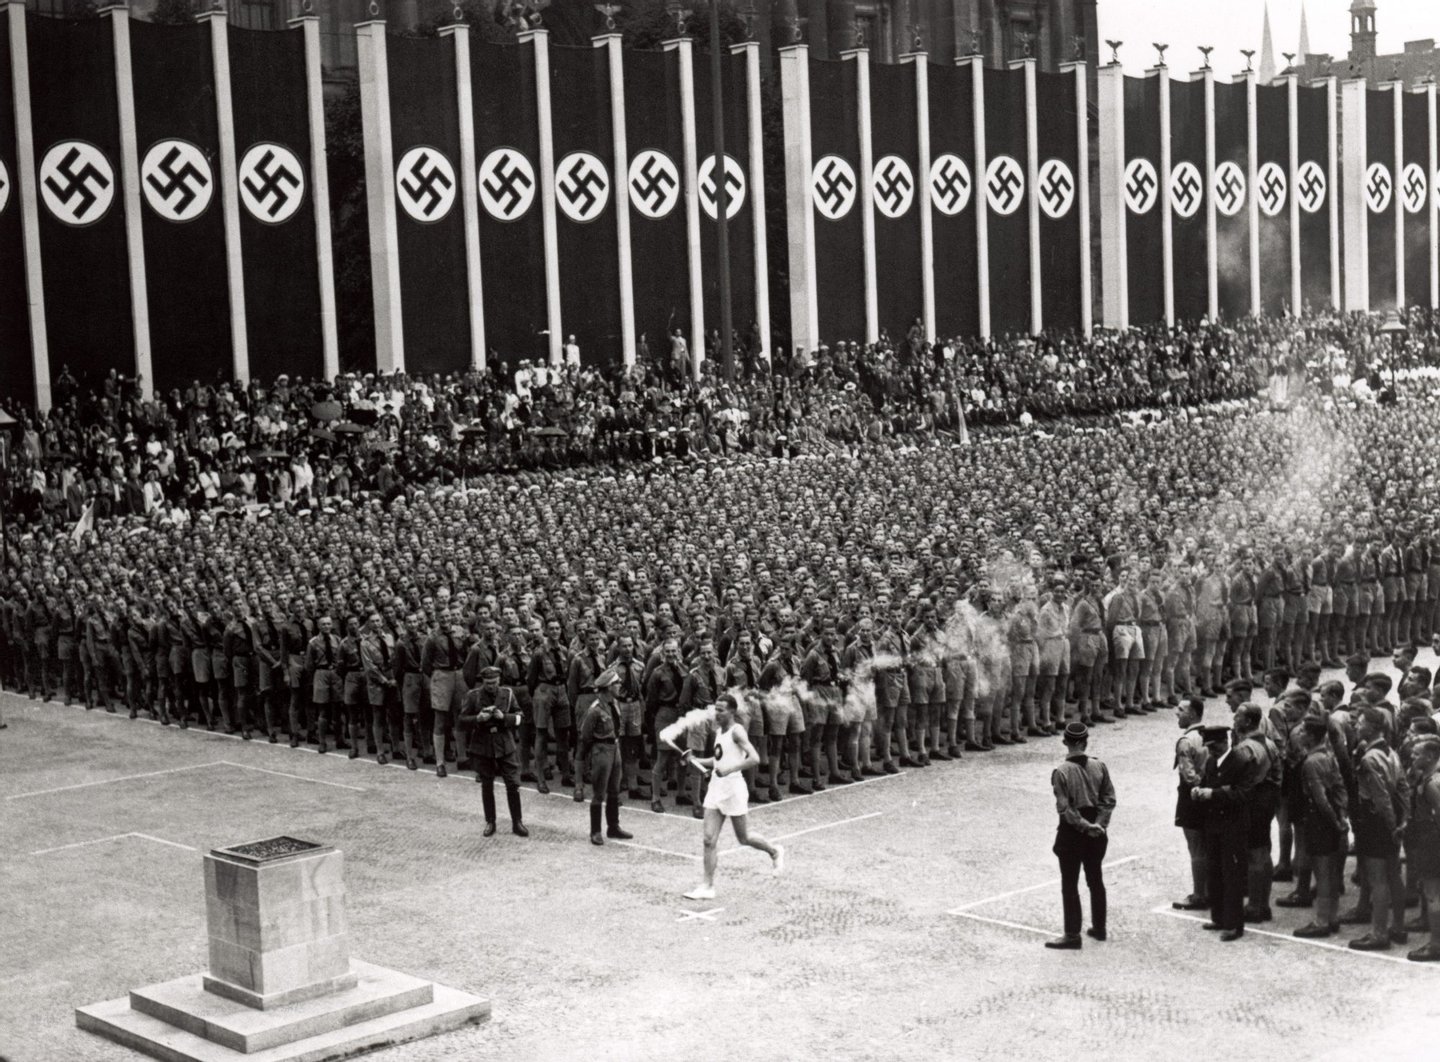 The Olympic torch is carried into the stadium during the opening ceremonies of the XI Olympic Games at the Olympic Stadium in Berlin, Germany, on August 1, 1936. (Photo by Getty Images)